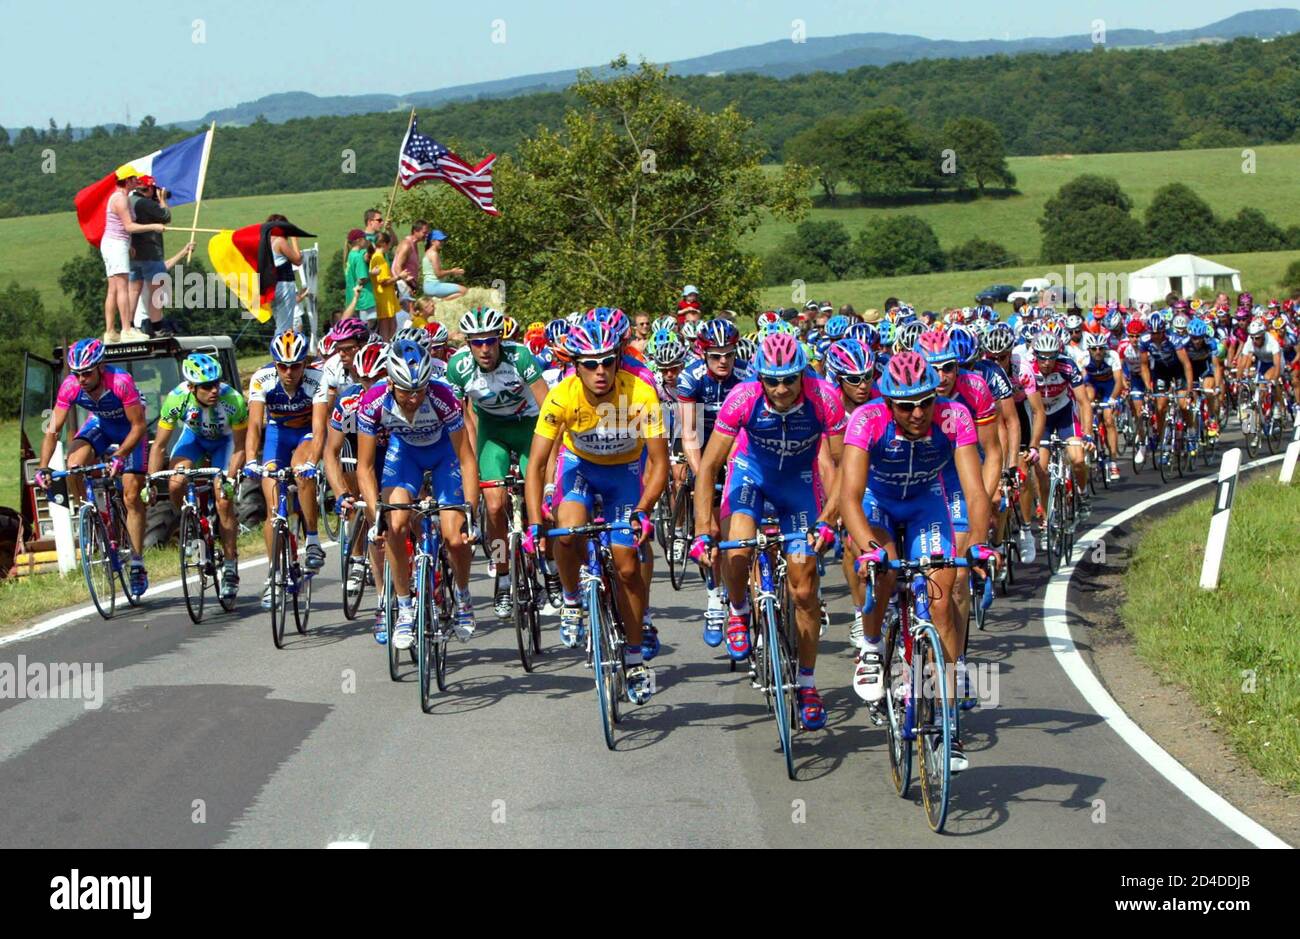 Lampre team riders lead the pack through the German countryside during  the 181km second stage of  the 89th Tour de France cycling race from [Luxembourg city] to Saarbrucken in Germany July 8, 2002. [Mapei team rider Oscar Freire of Spain won the stage in a sprint and  Lampre team rider Rubens Bertoglati of Switzerland retains the yellow leader jersey.] Stock Photo